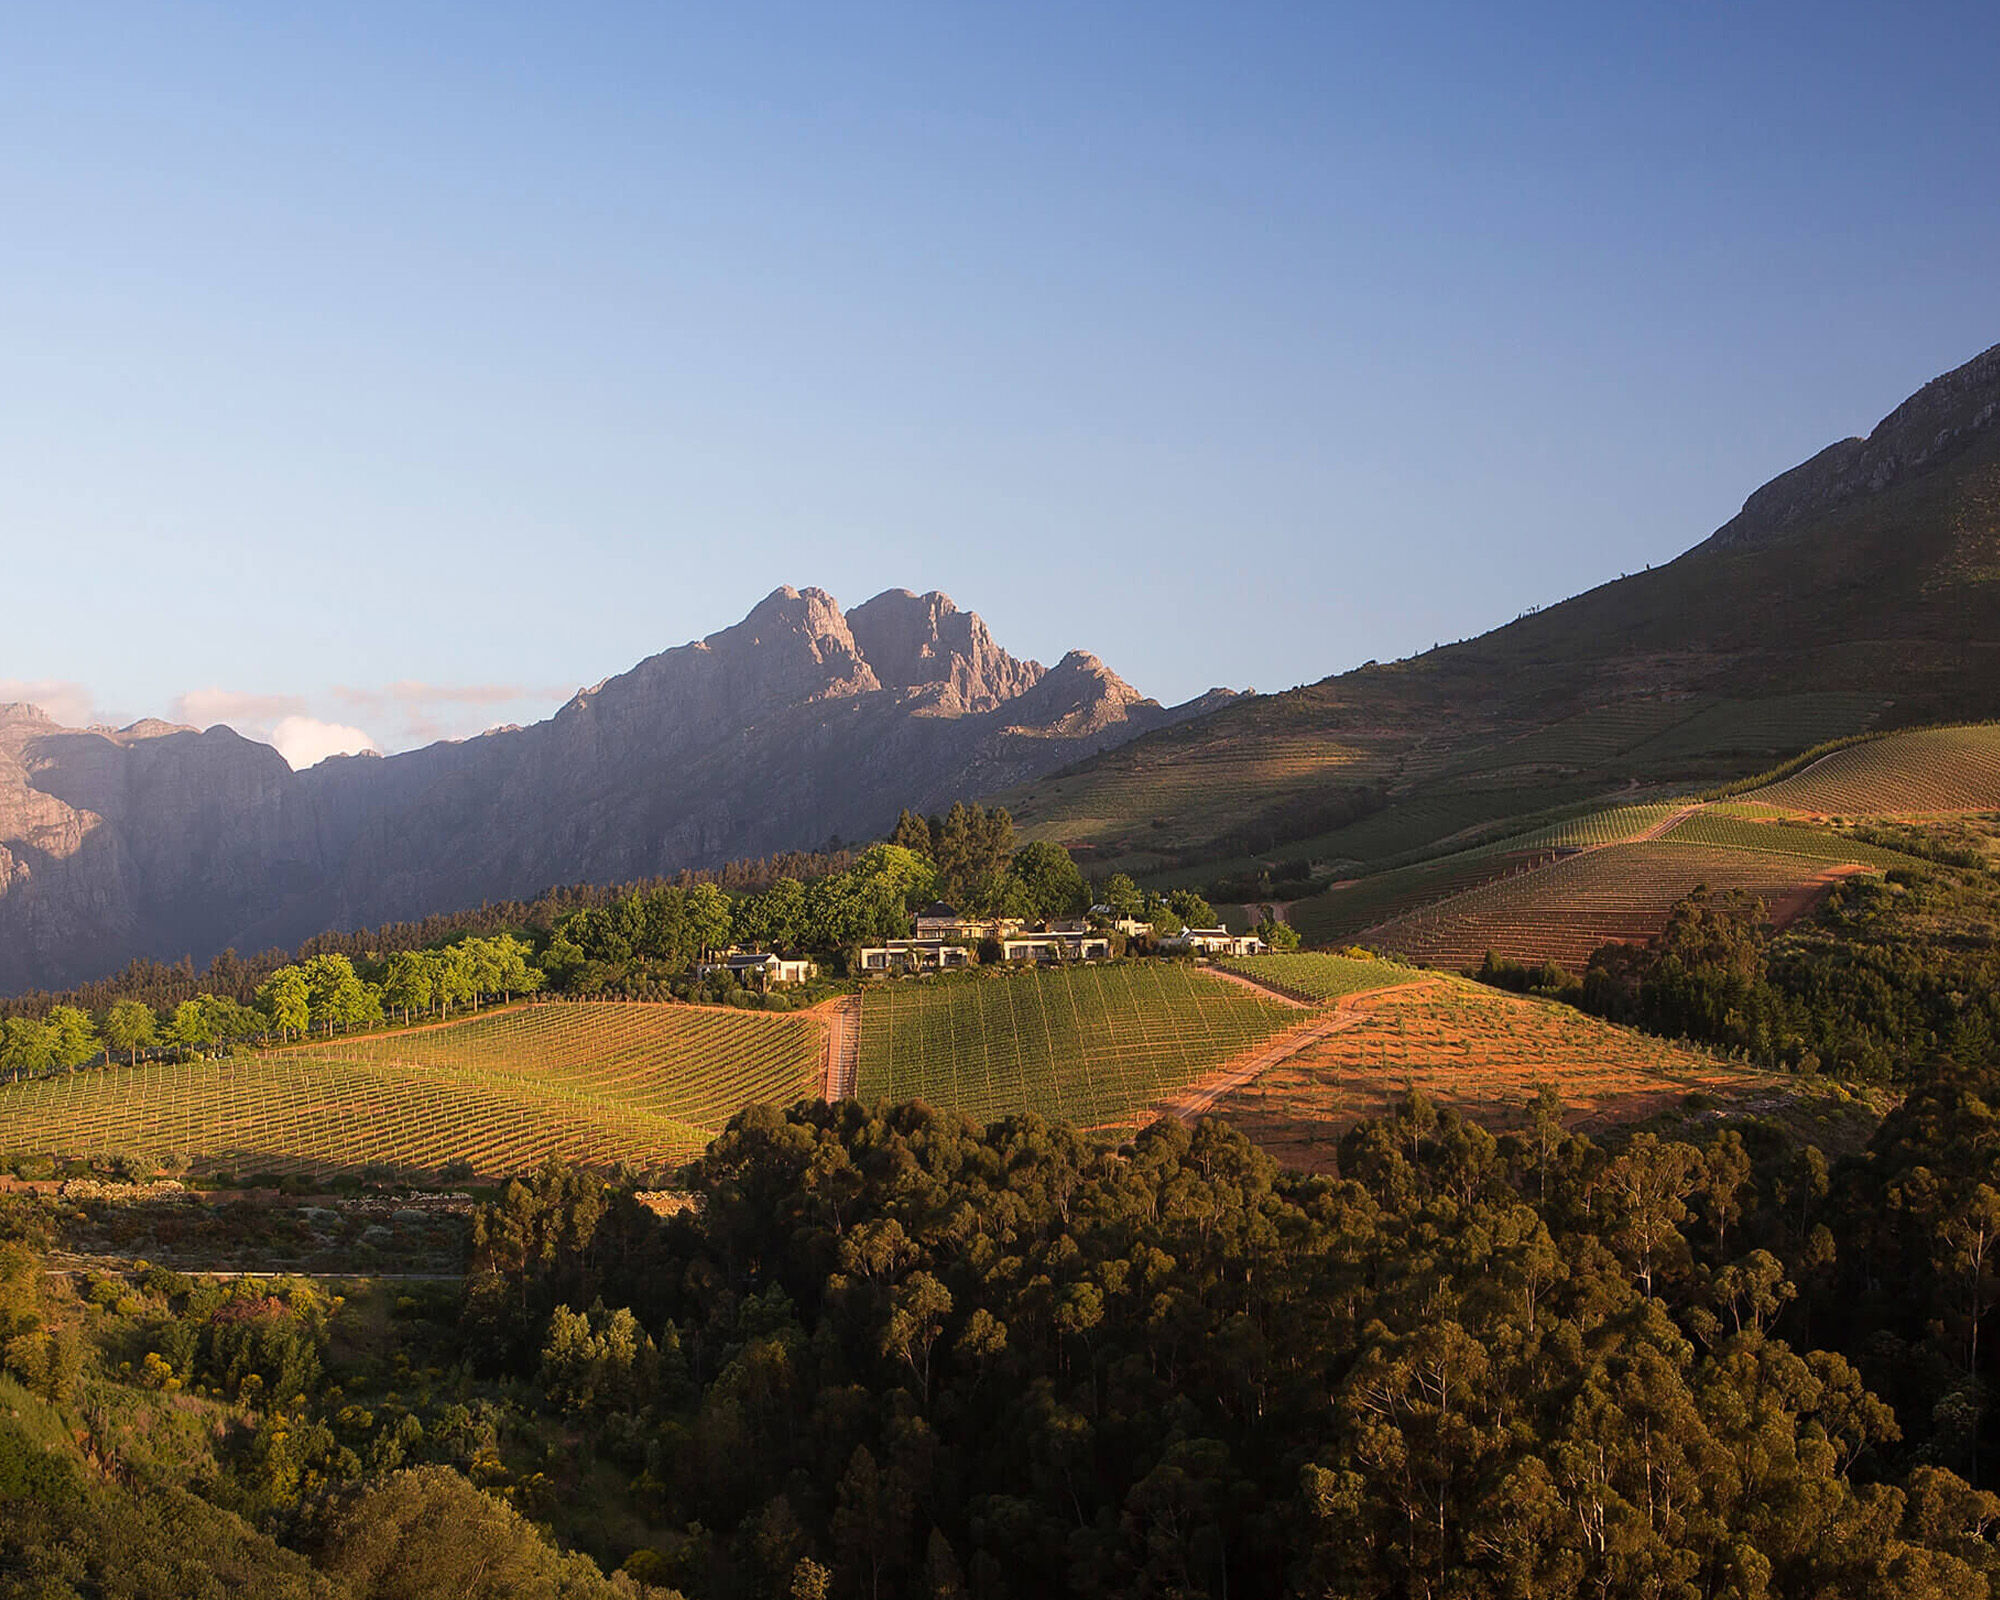 View of the Delaire Graff Estate in Stellenbosch, South Africa